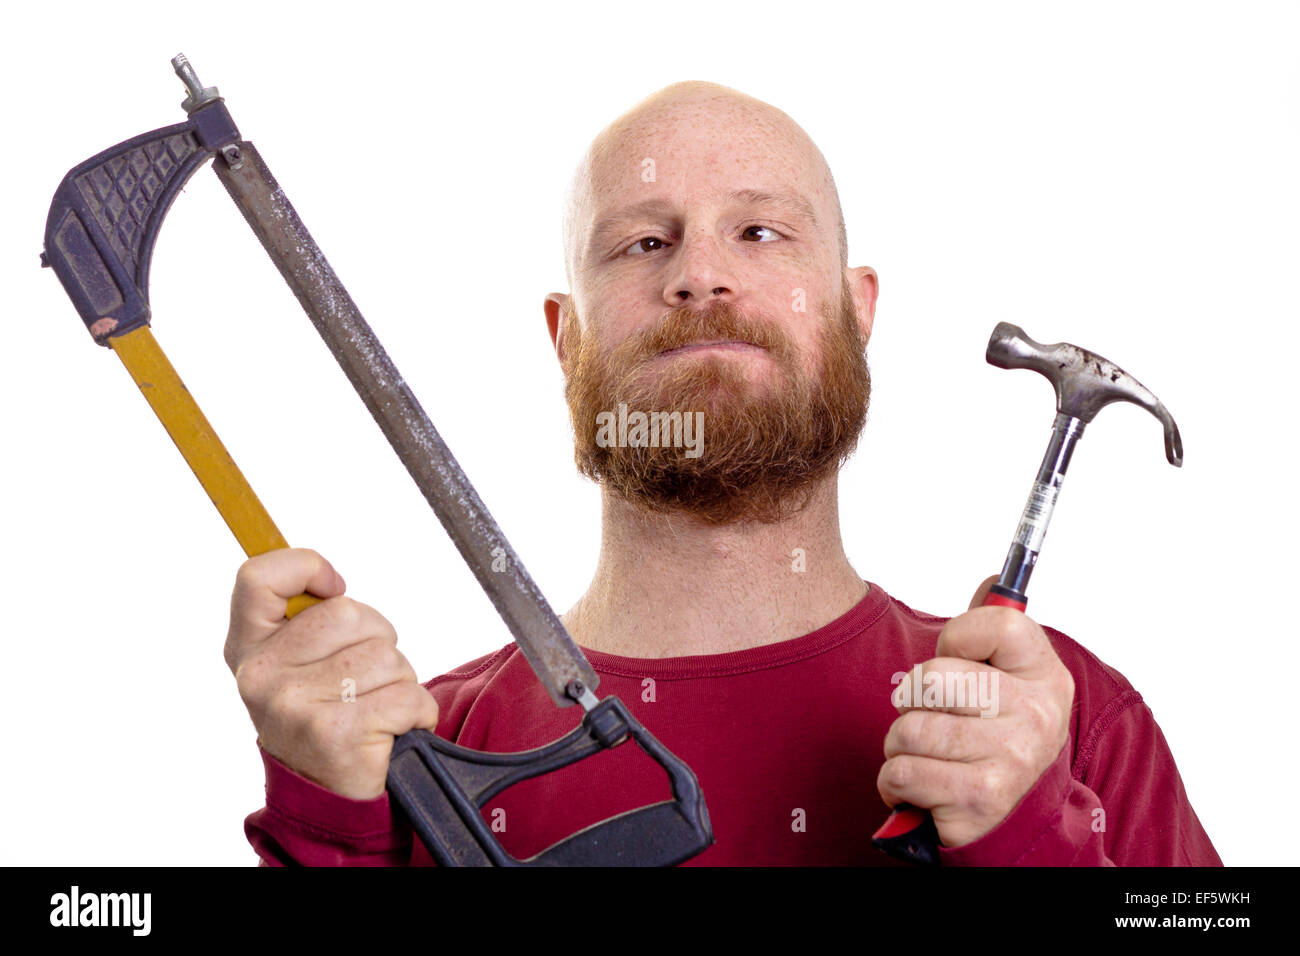 silly man holding hammer and saw in his hands Stock Photo